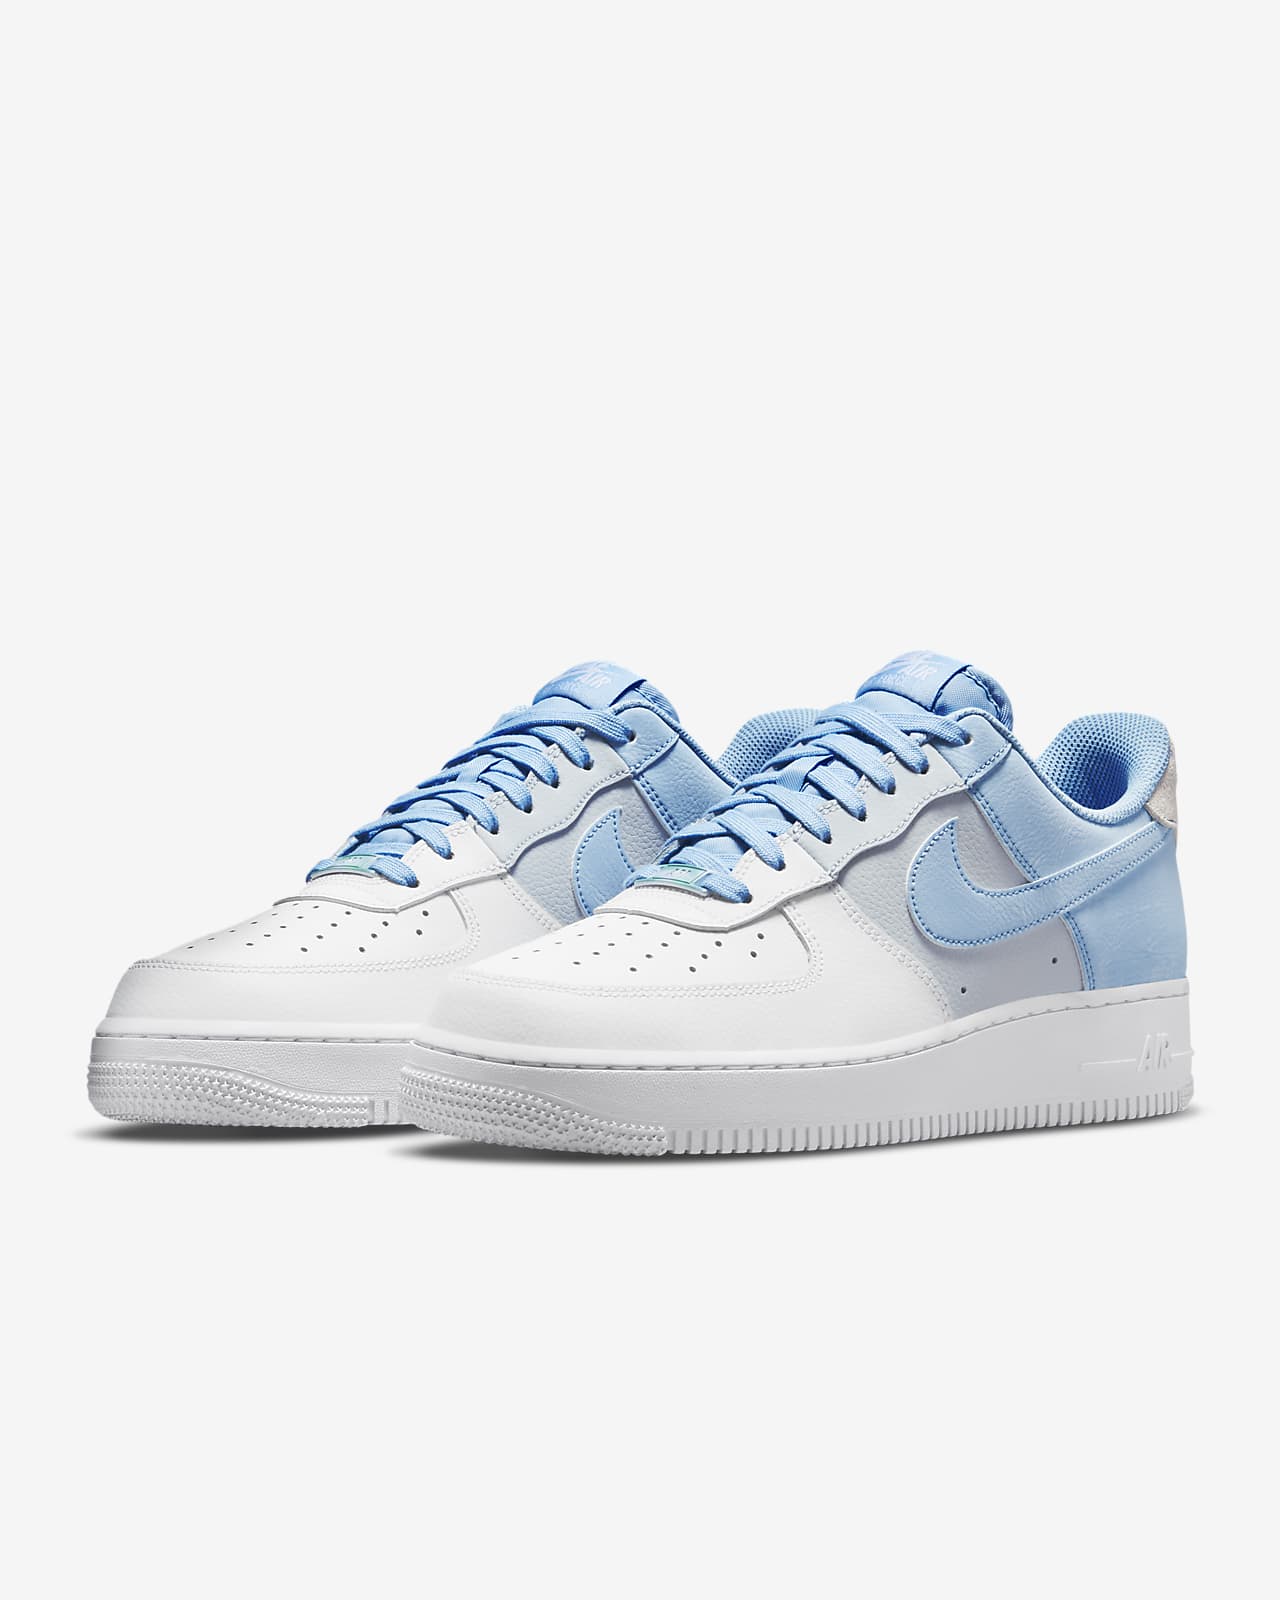 nike air force 1 blue white and grey